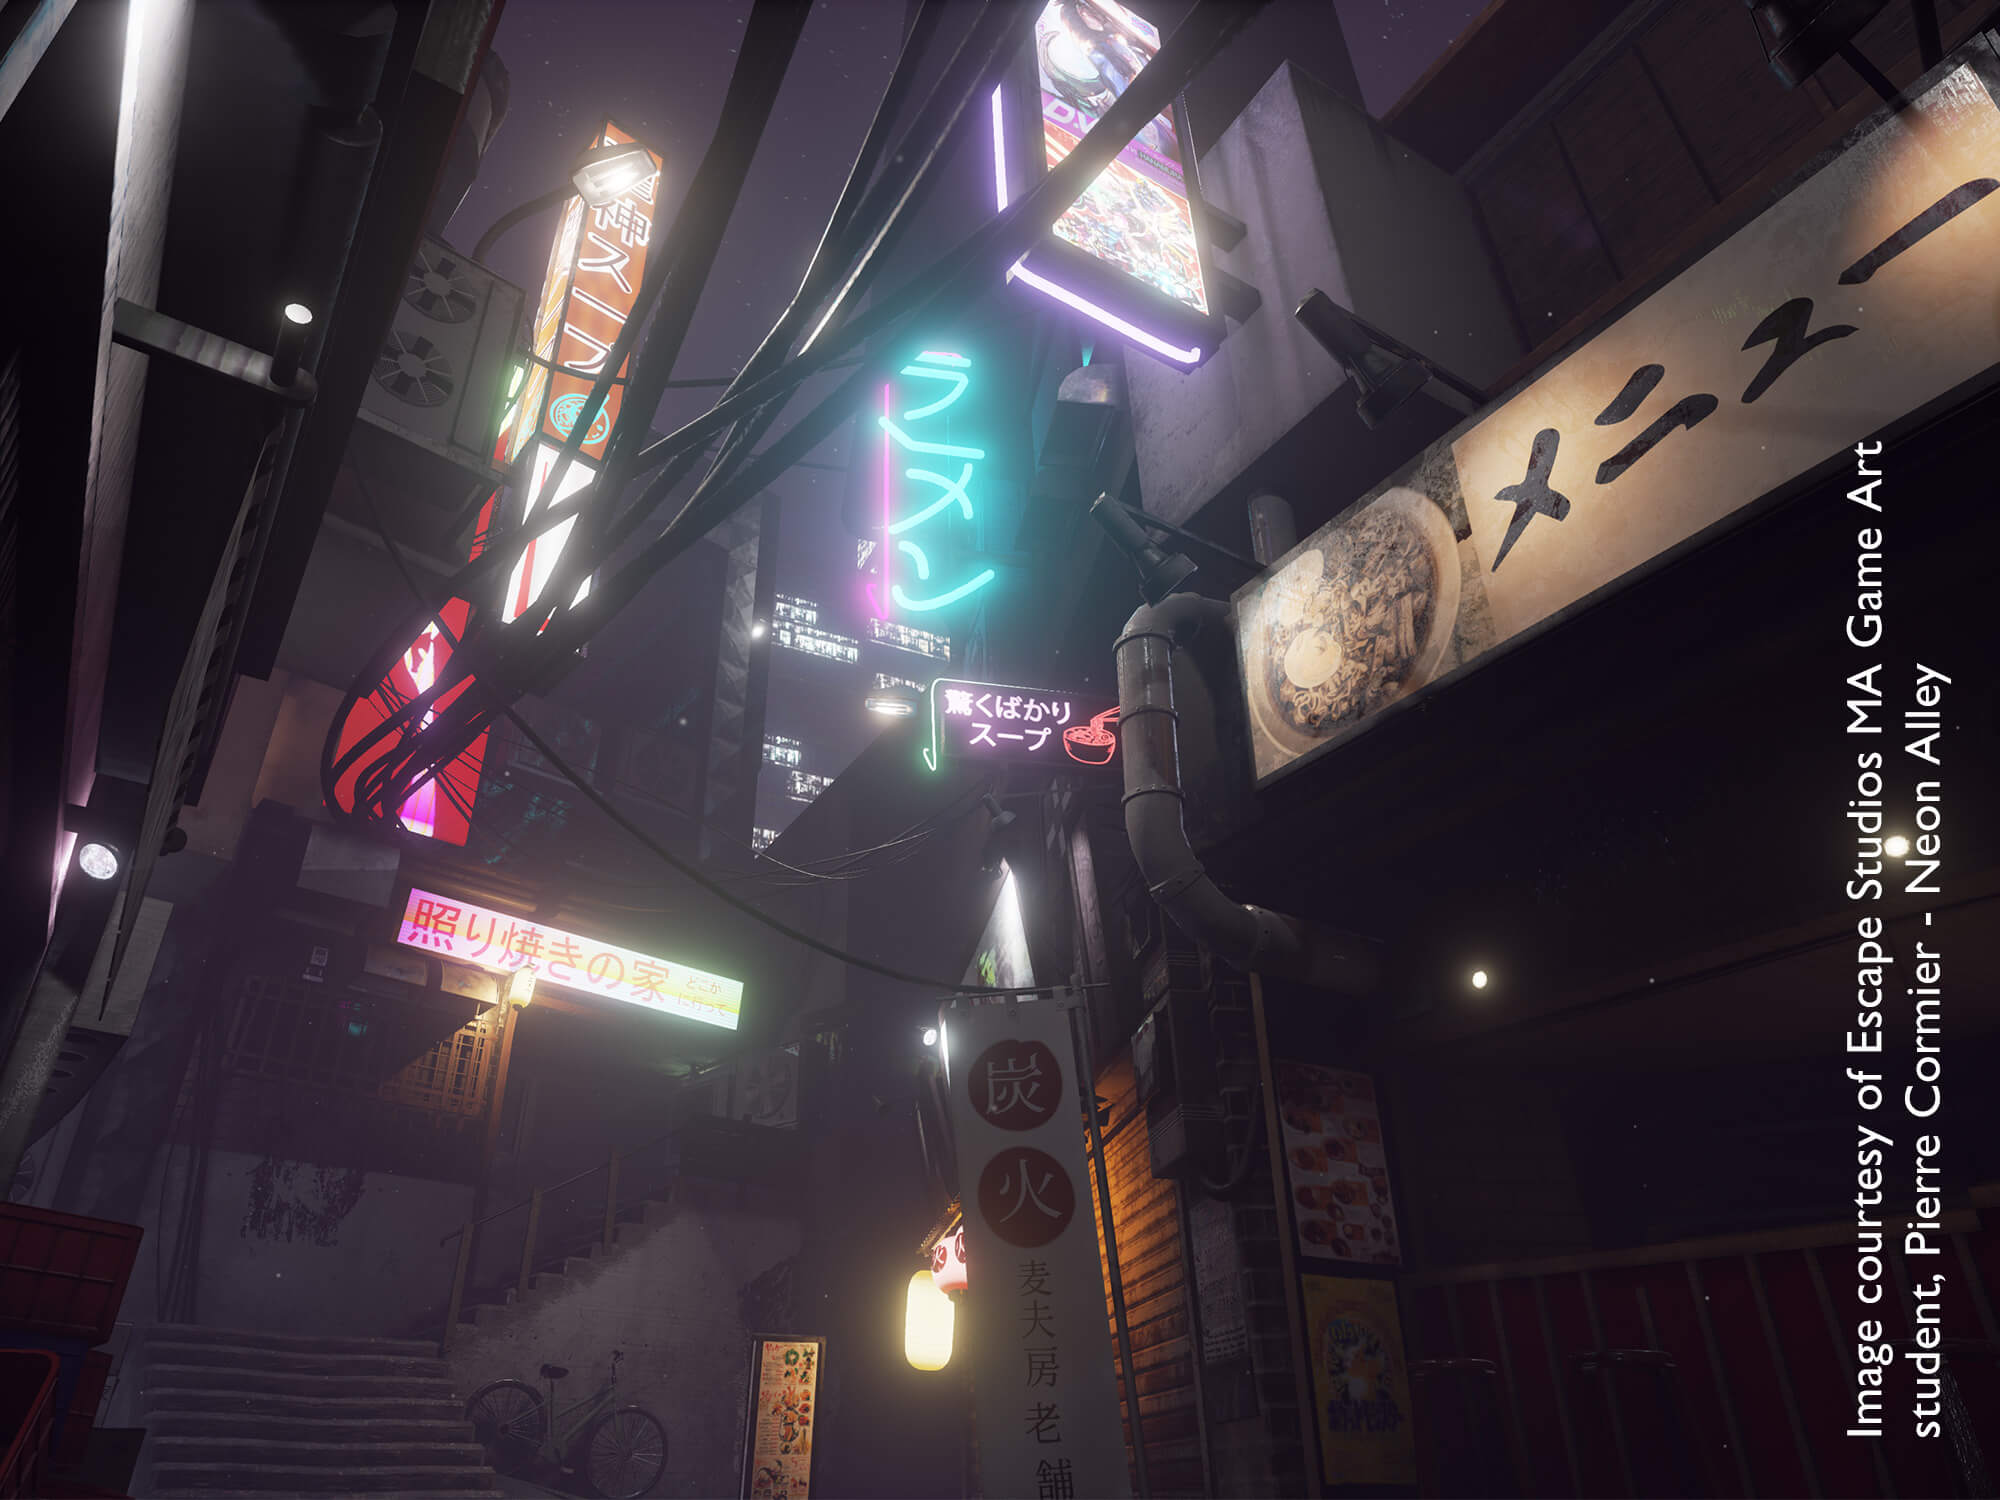 Game environment scene of a city's dark alley with neon signs